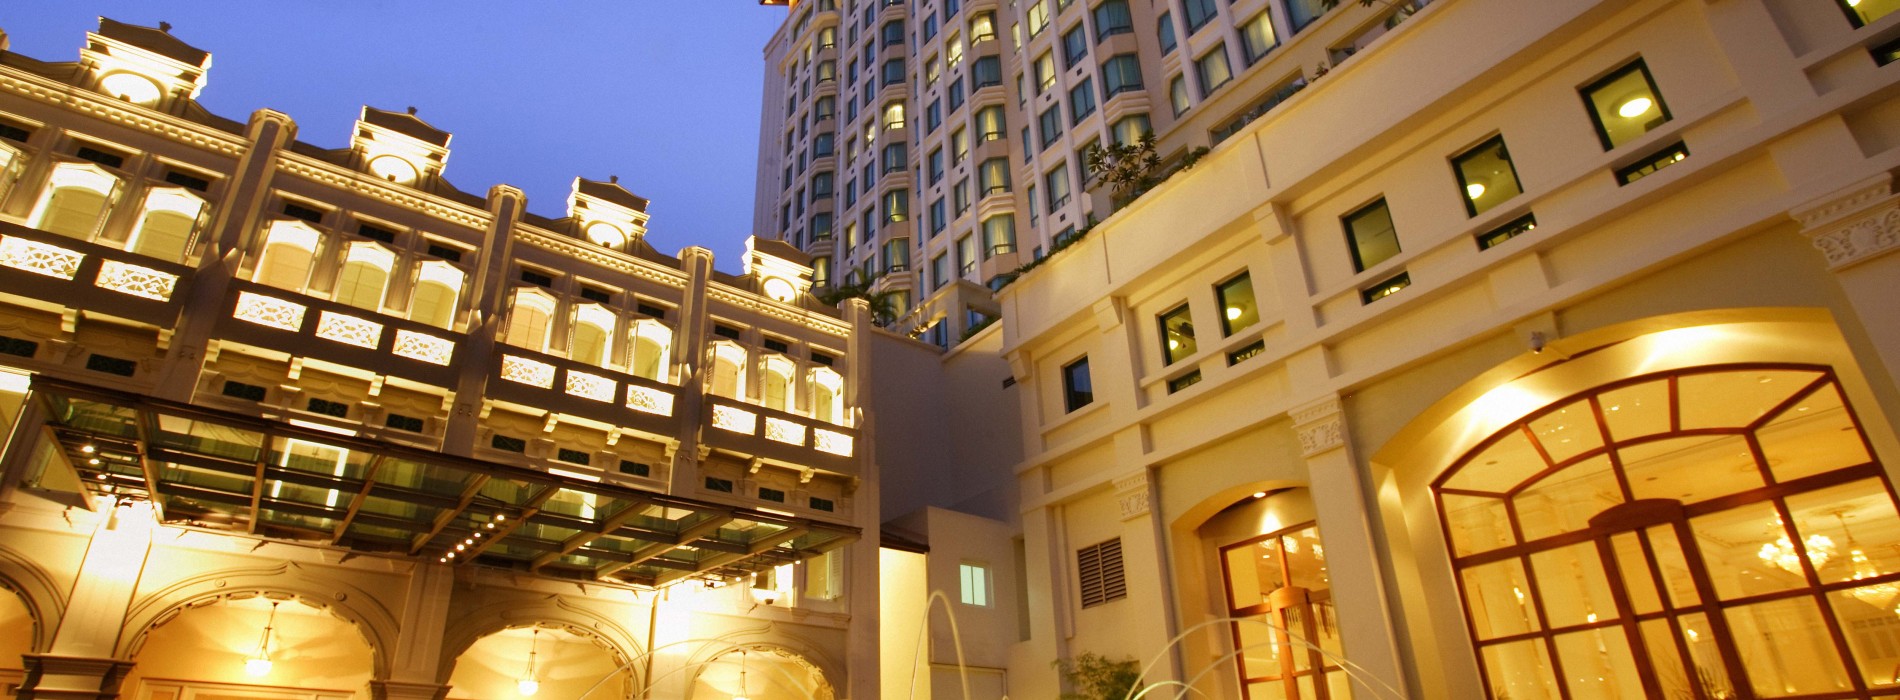 IHG Offers guests up to 30% off rooms across all hotels in Asia, Middle East and Africa